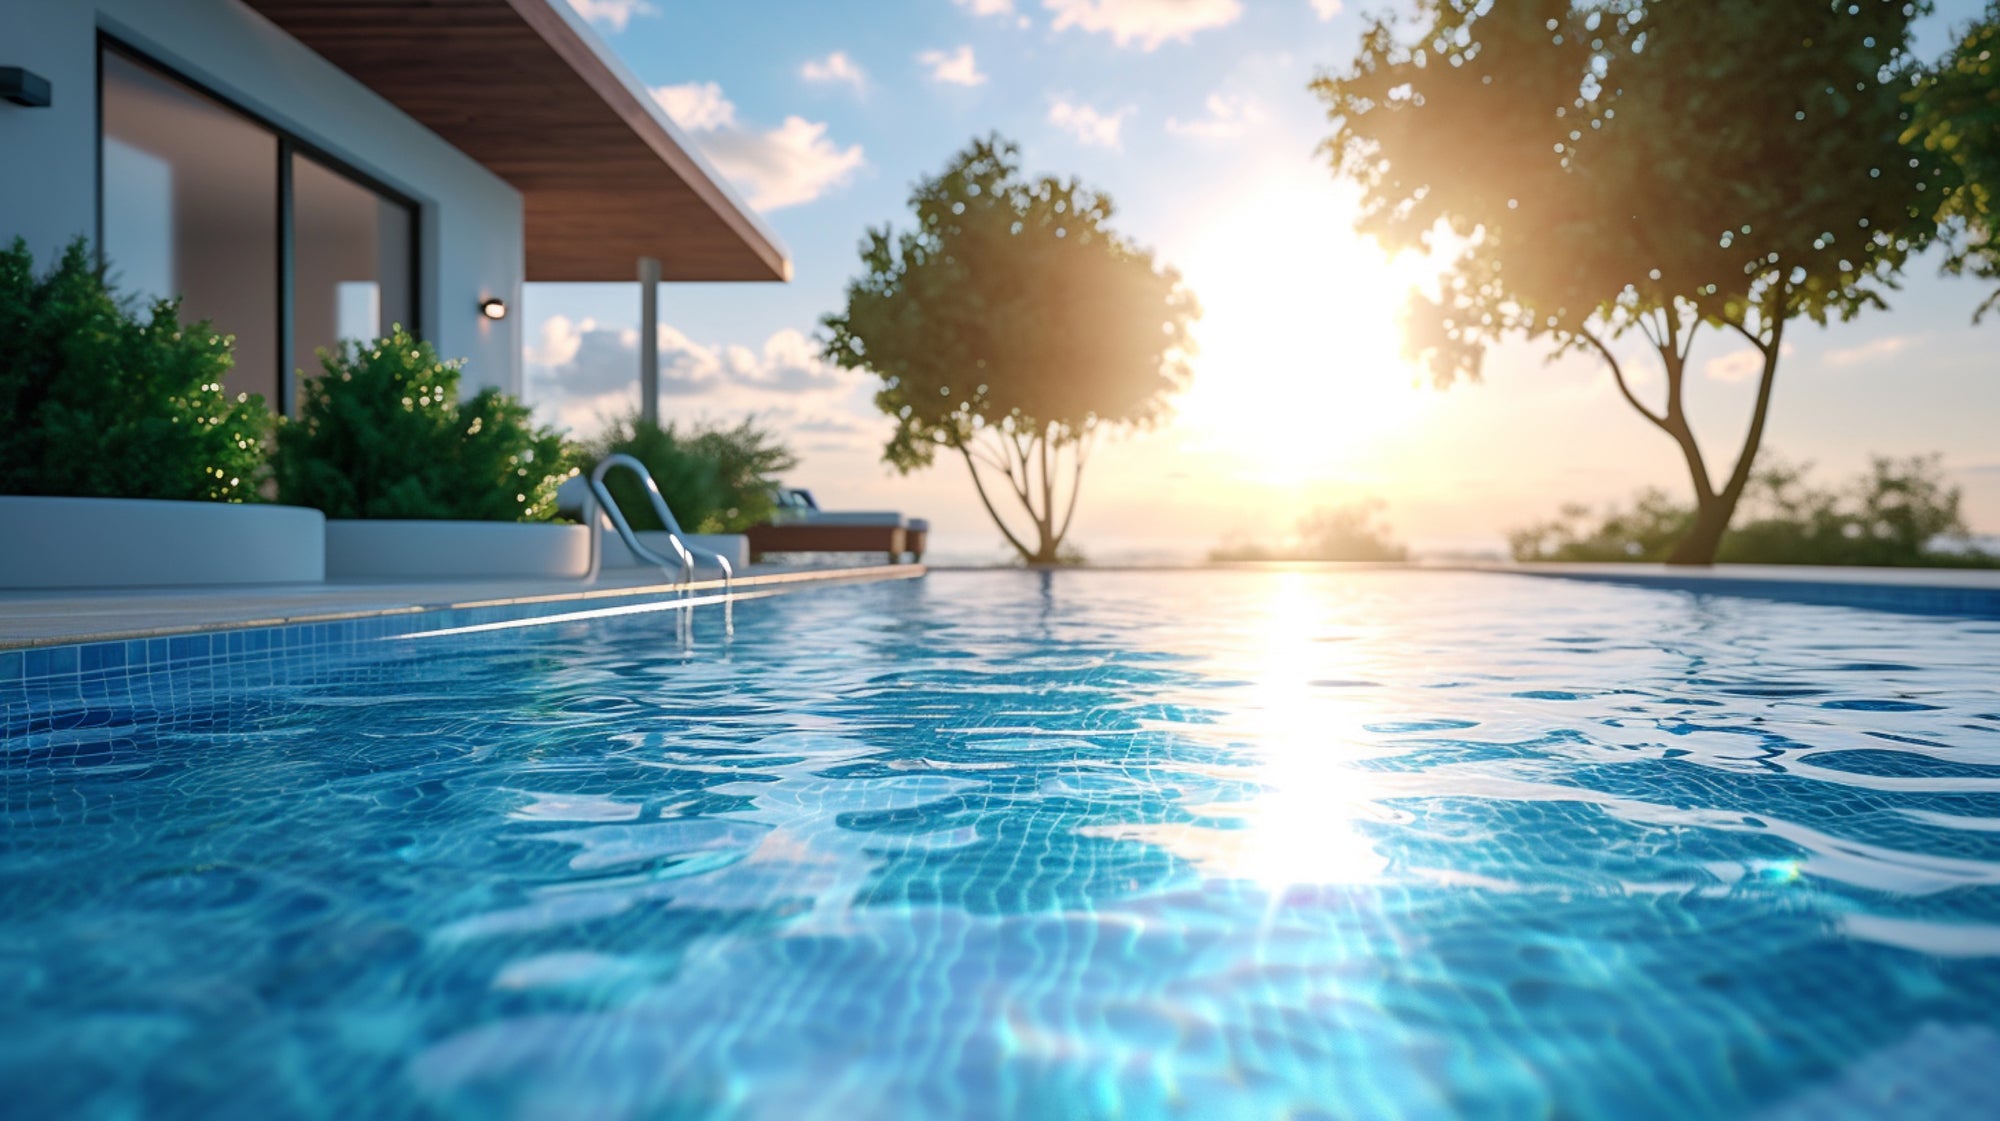 10 Essential Tips for Opening Your Pool This Spring